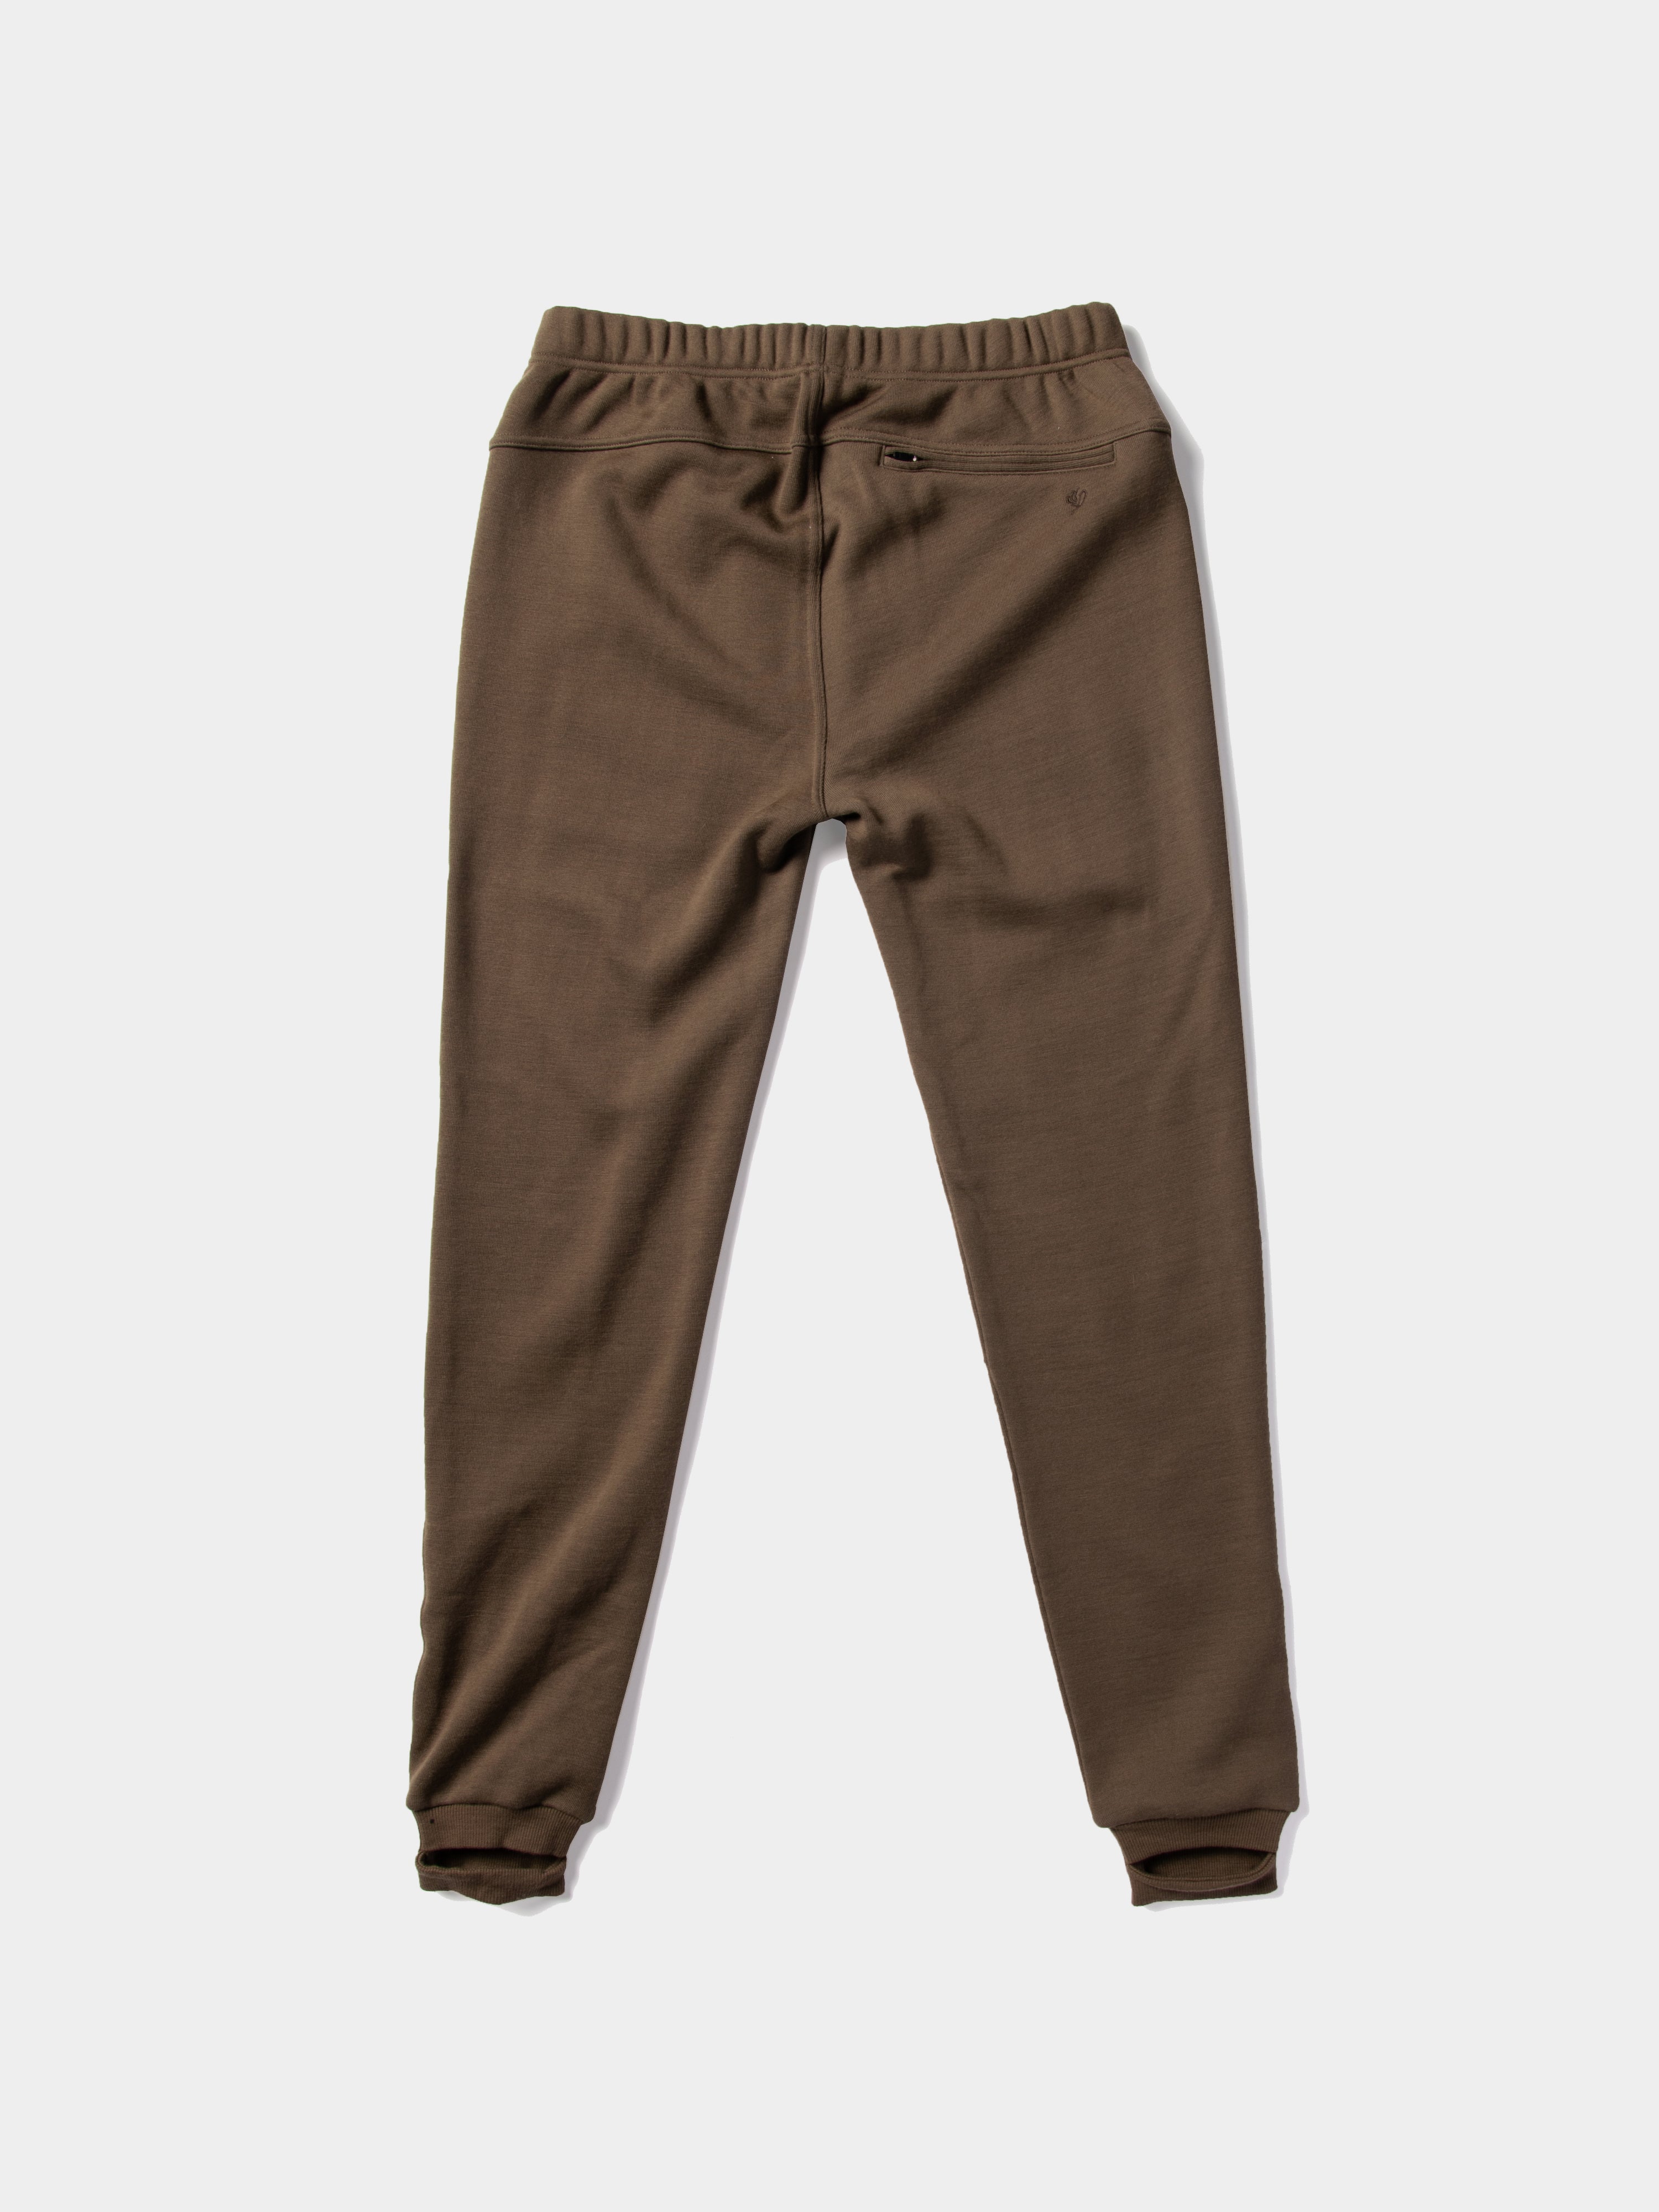 Buy Brown Trousers & Pants for Women by Ginger by Lifestyle Online |  Ajio.com